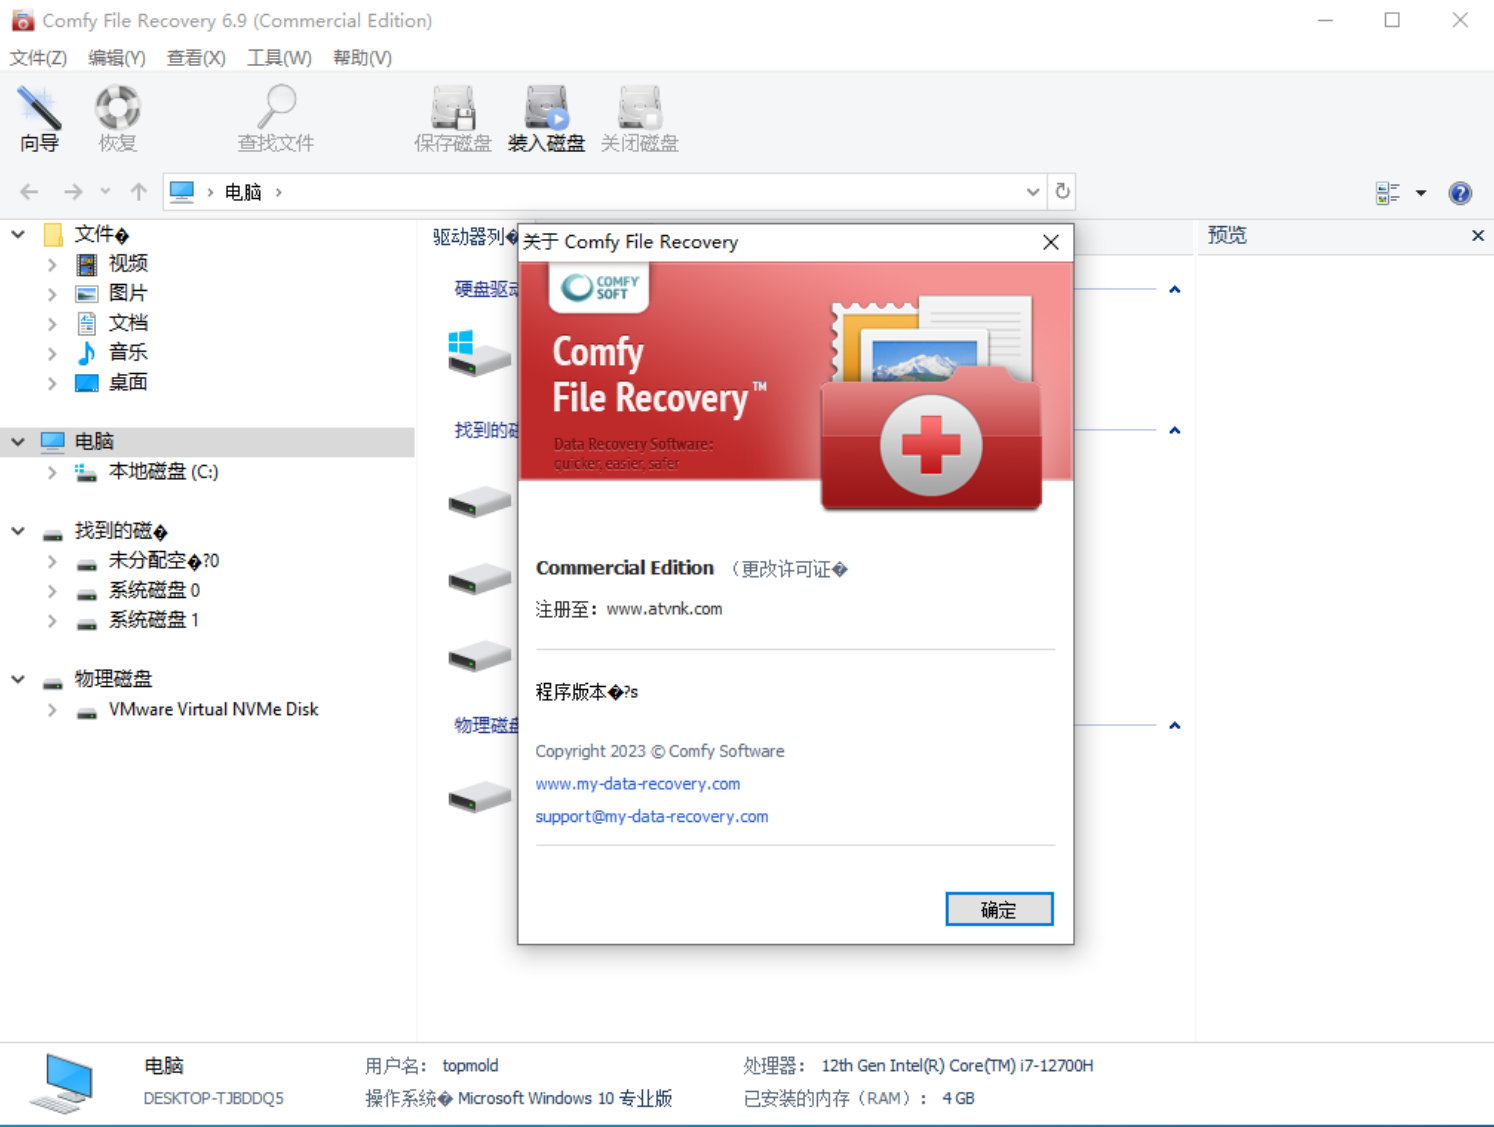 Comfy File Recovery v6.9.0 Commercial Edition Multilingual 中文注册版